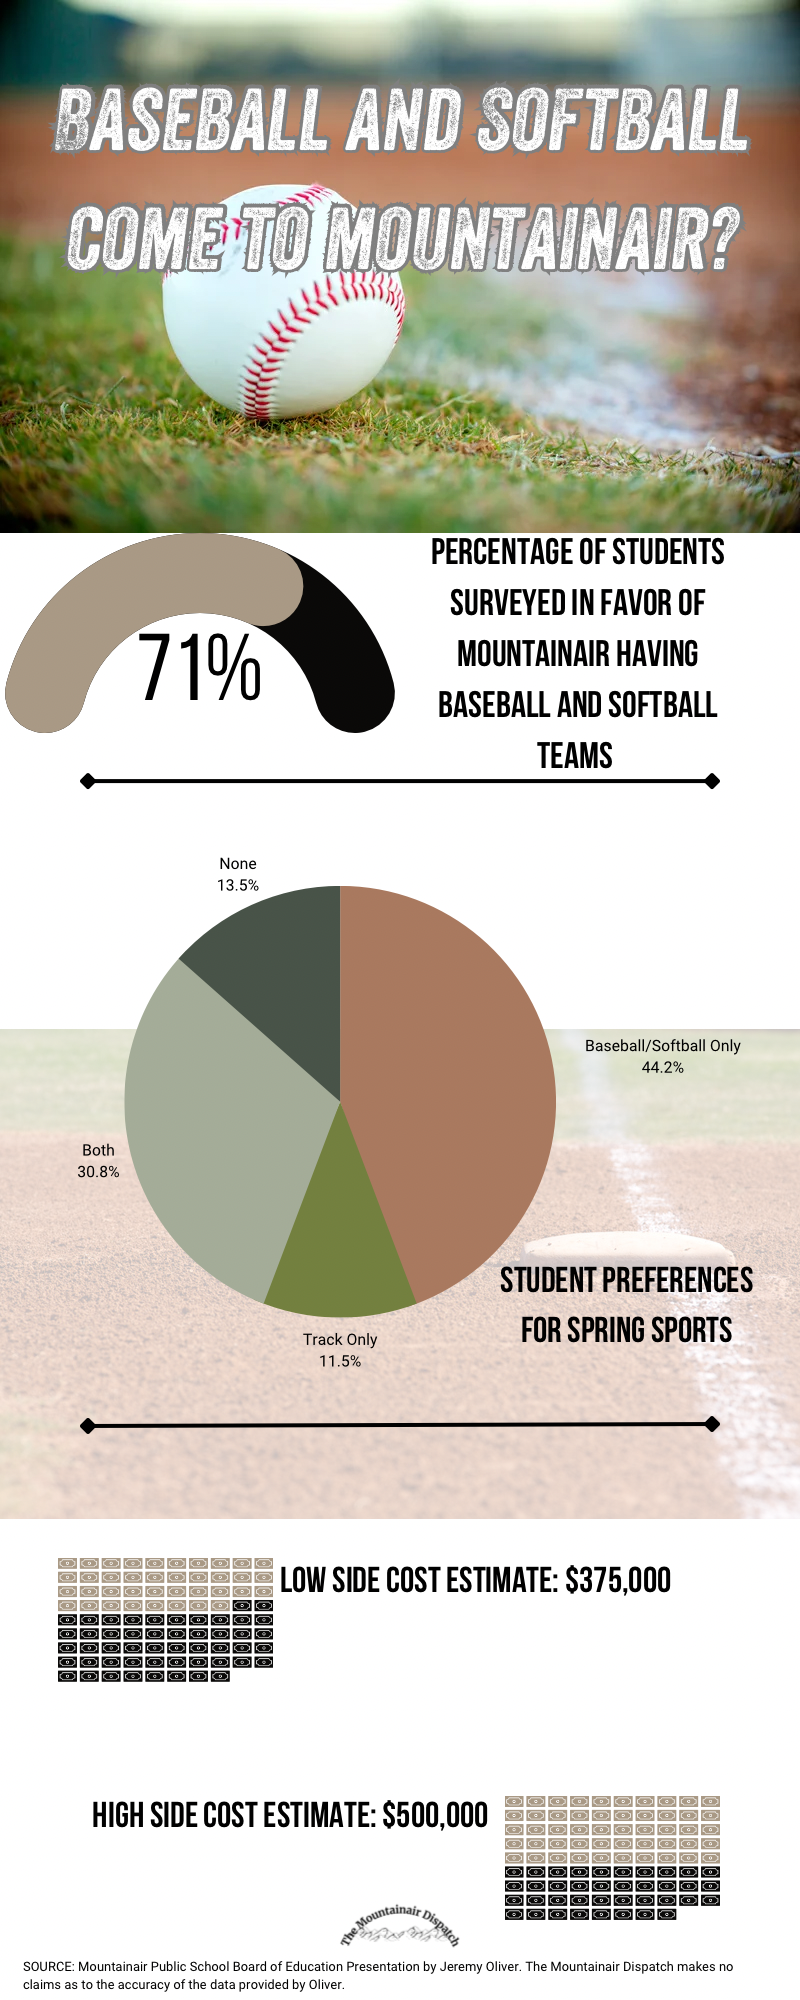 71% of students surveyed would be interested in baseball and softball coming to Mountainair